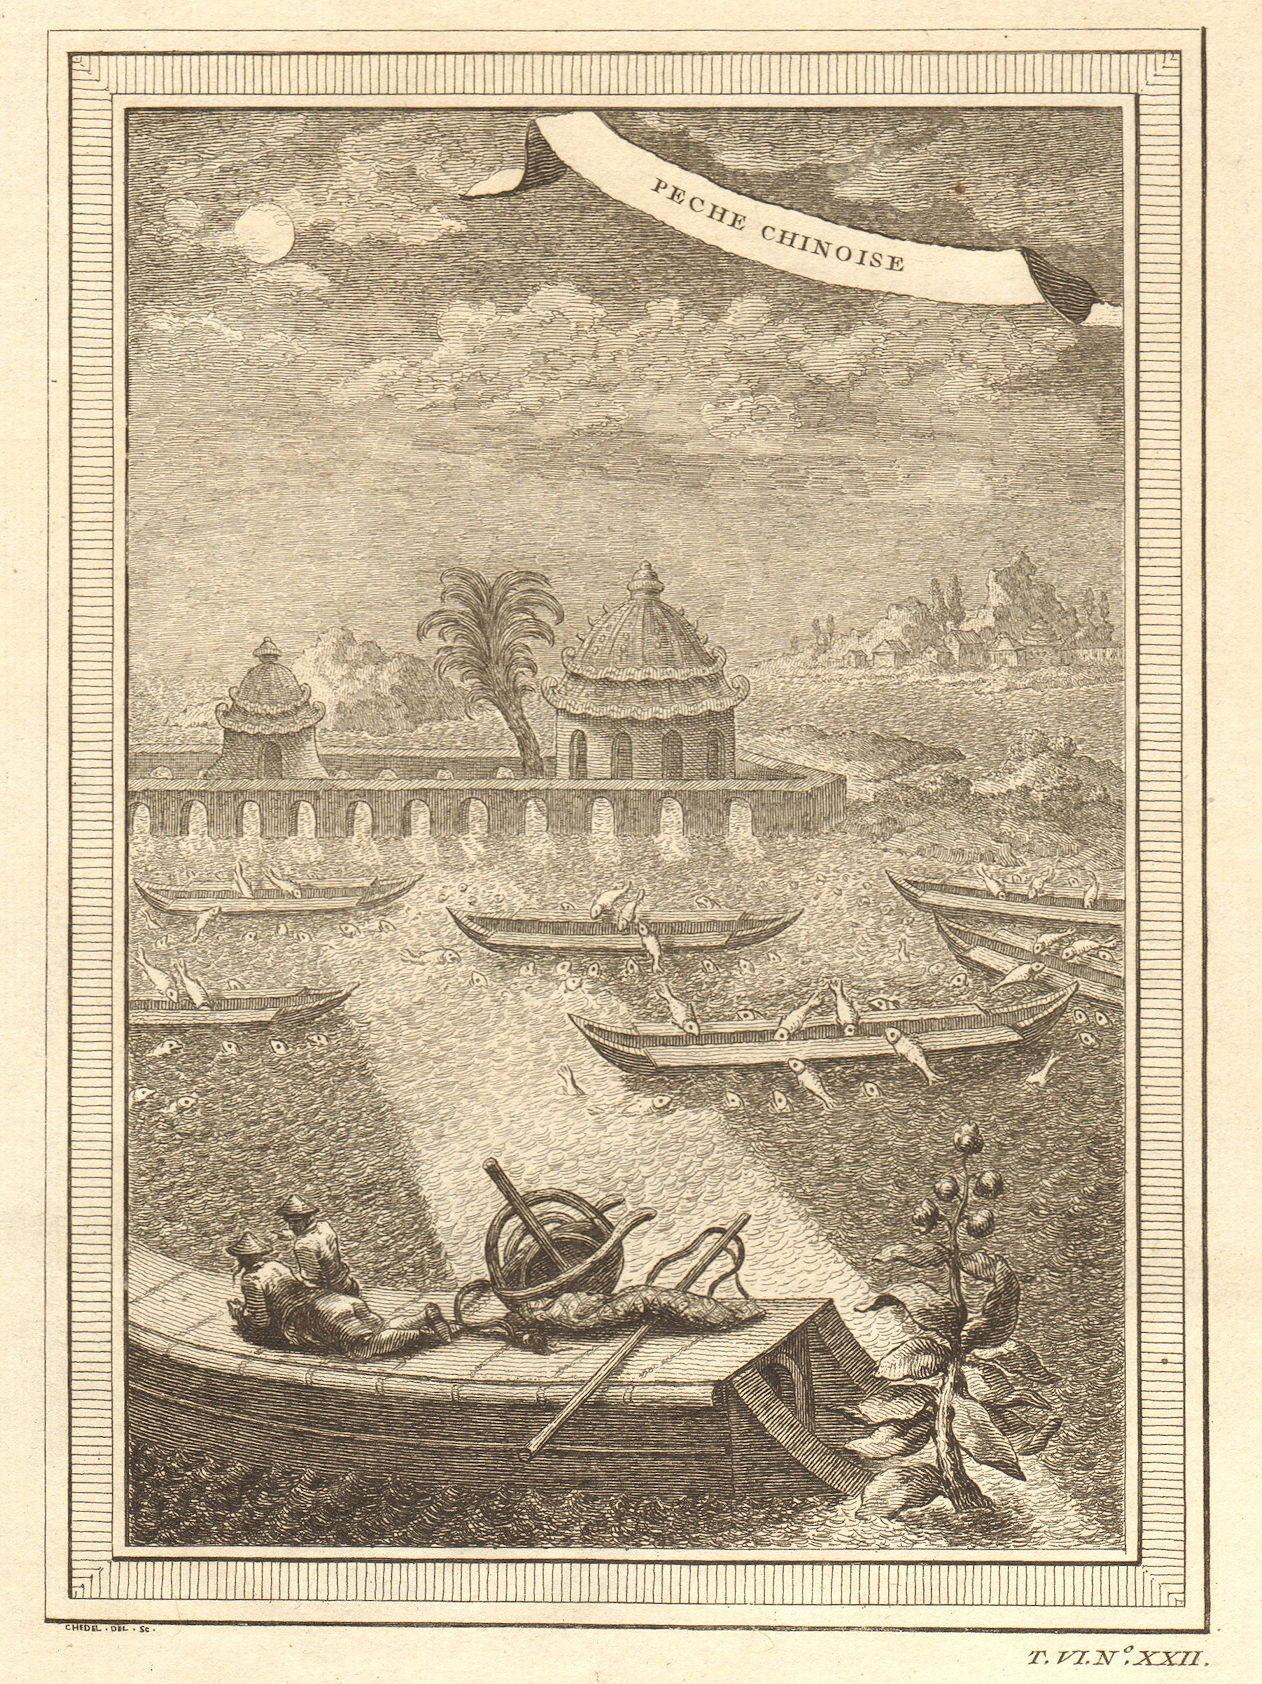 Associate Product Peche Chinoise. China. Chinese fishing method jumping into varnished boats 1748